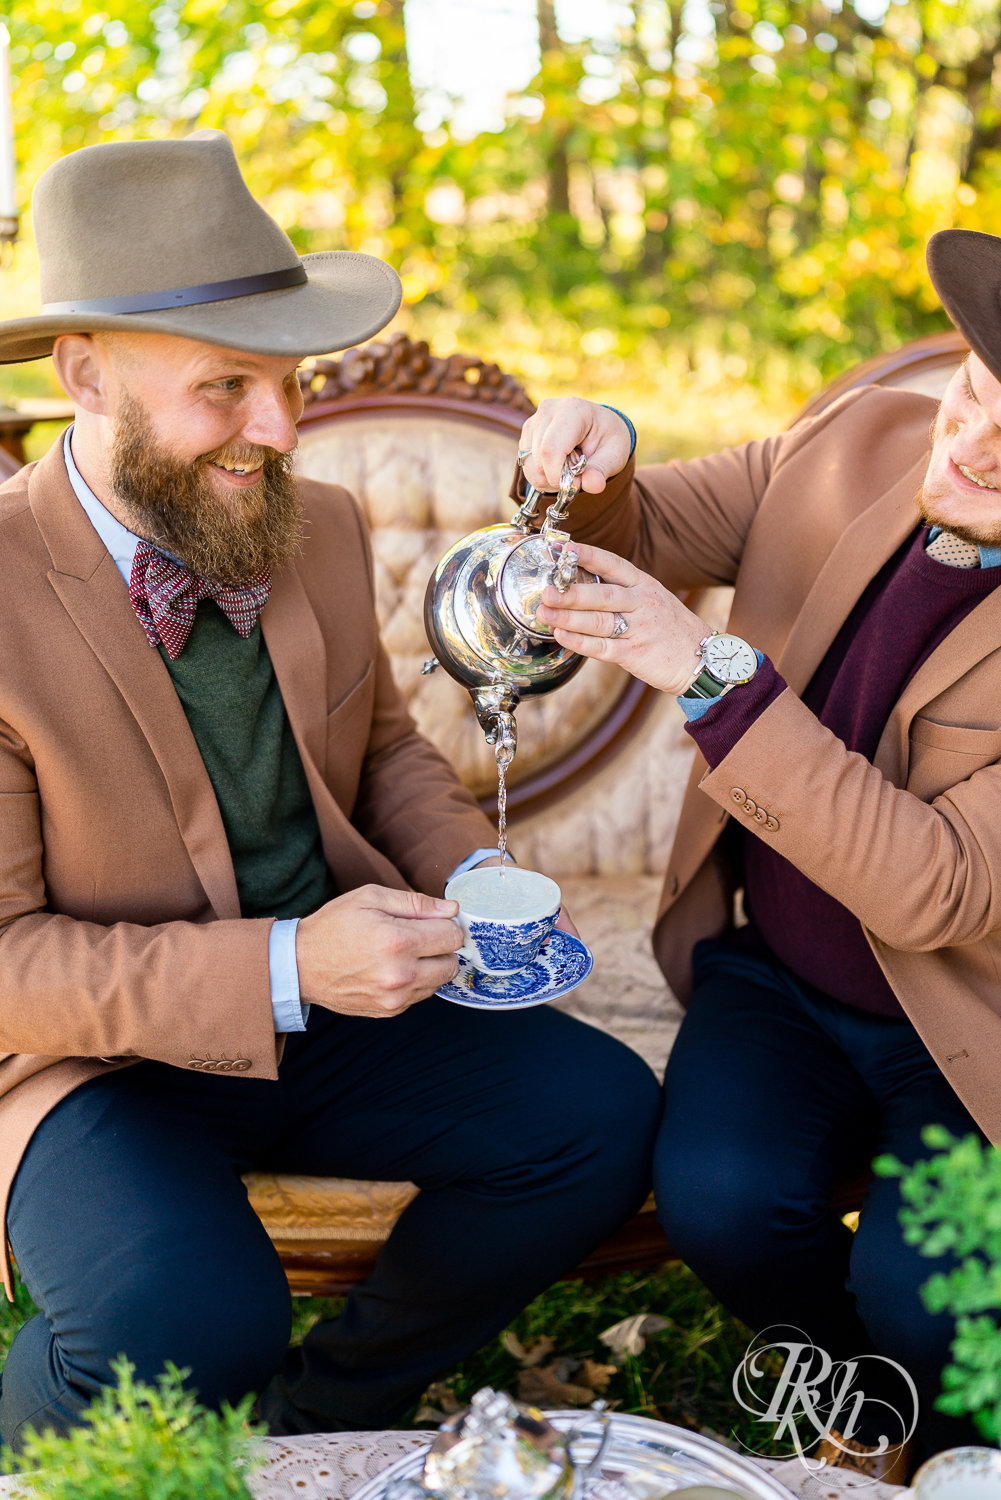 Two gay men smiling in suits and hats having tea in Belle Plaine, Minnesota.